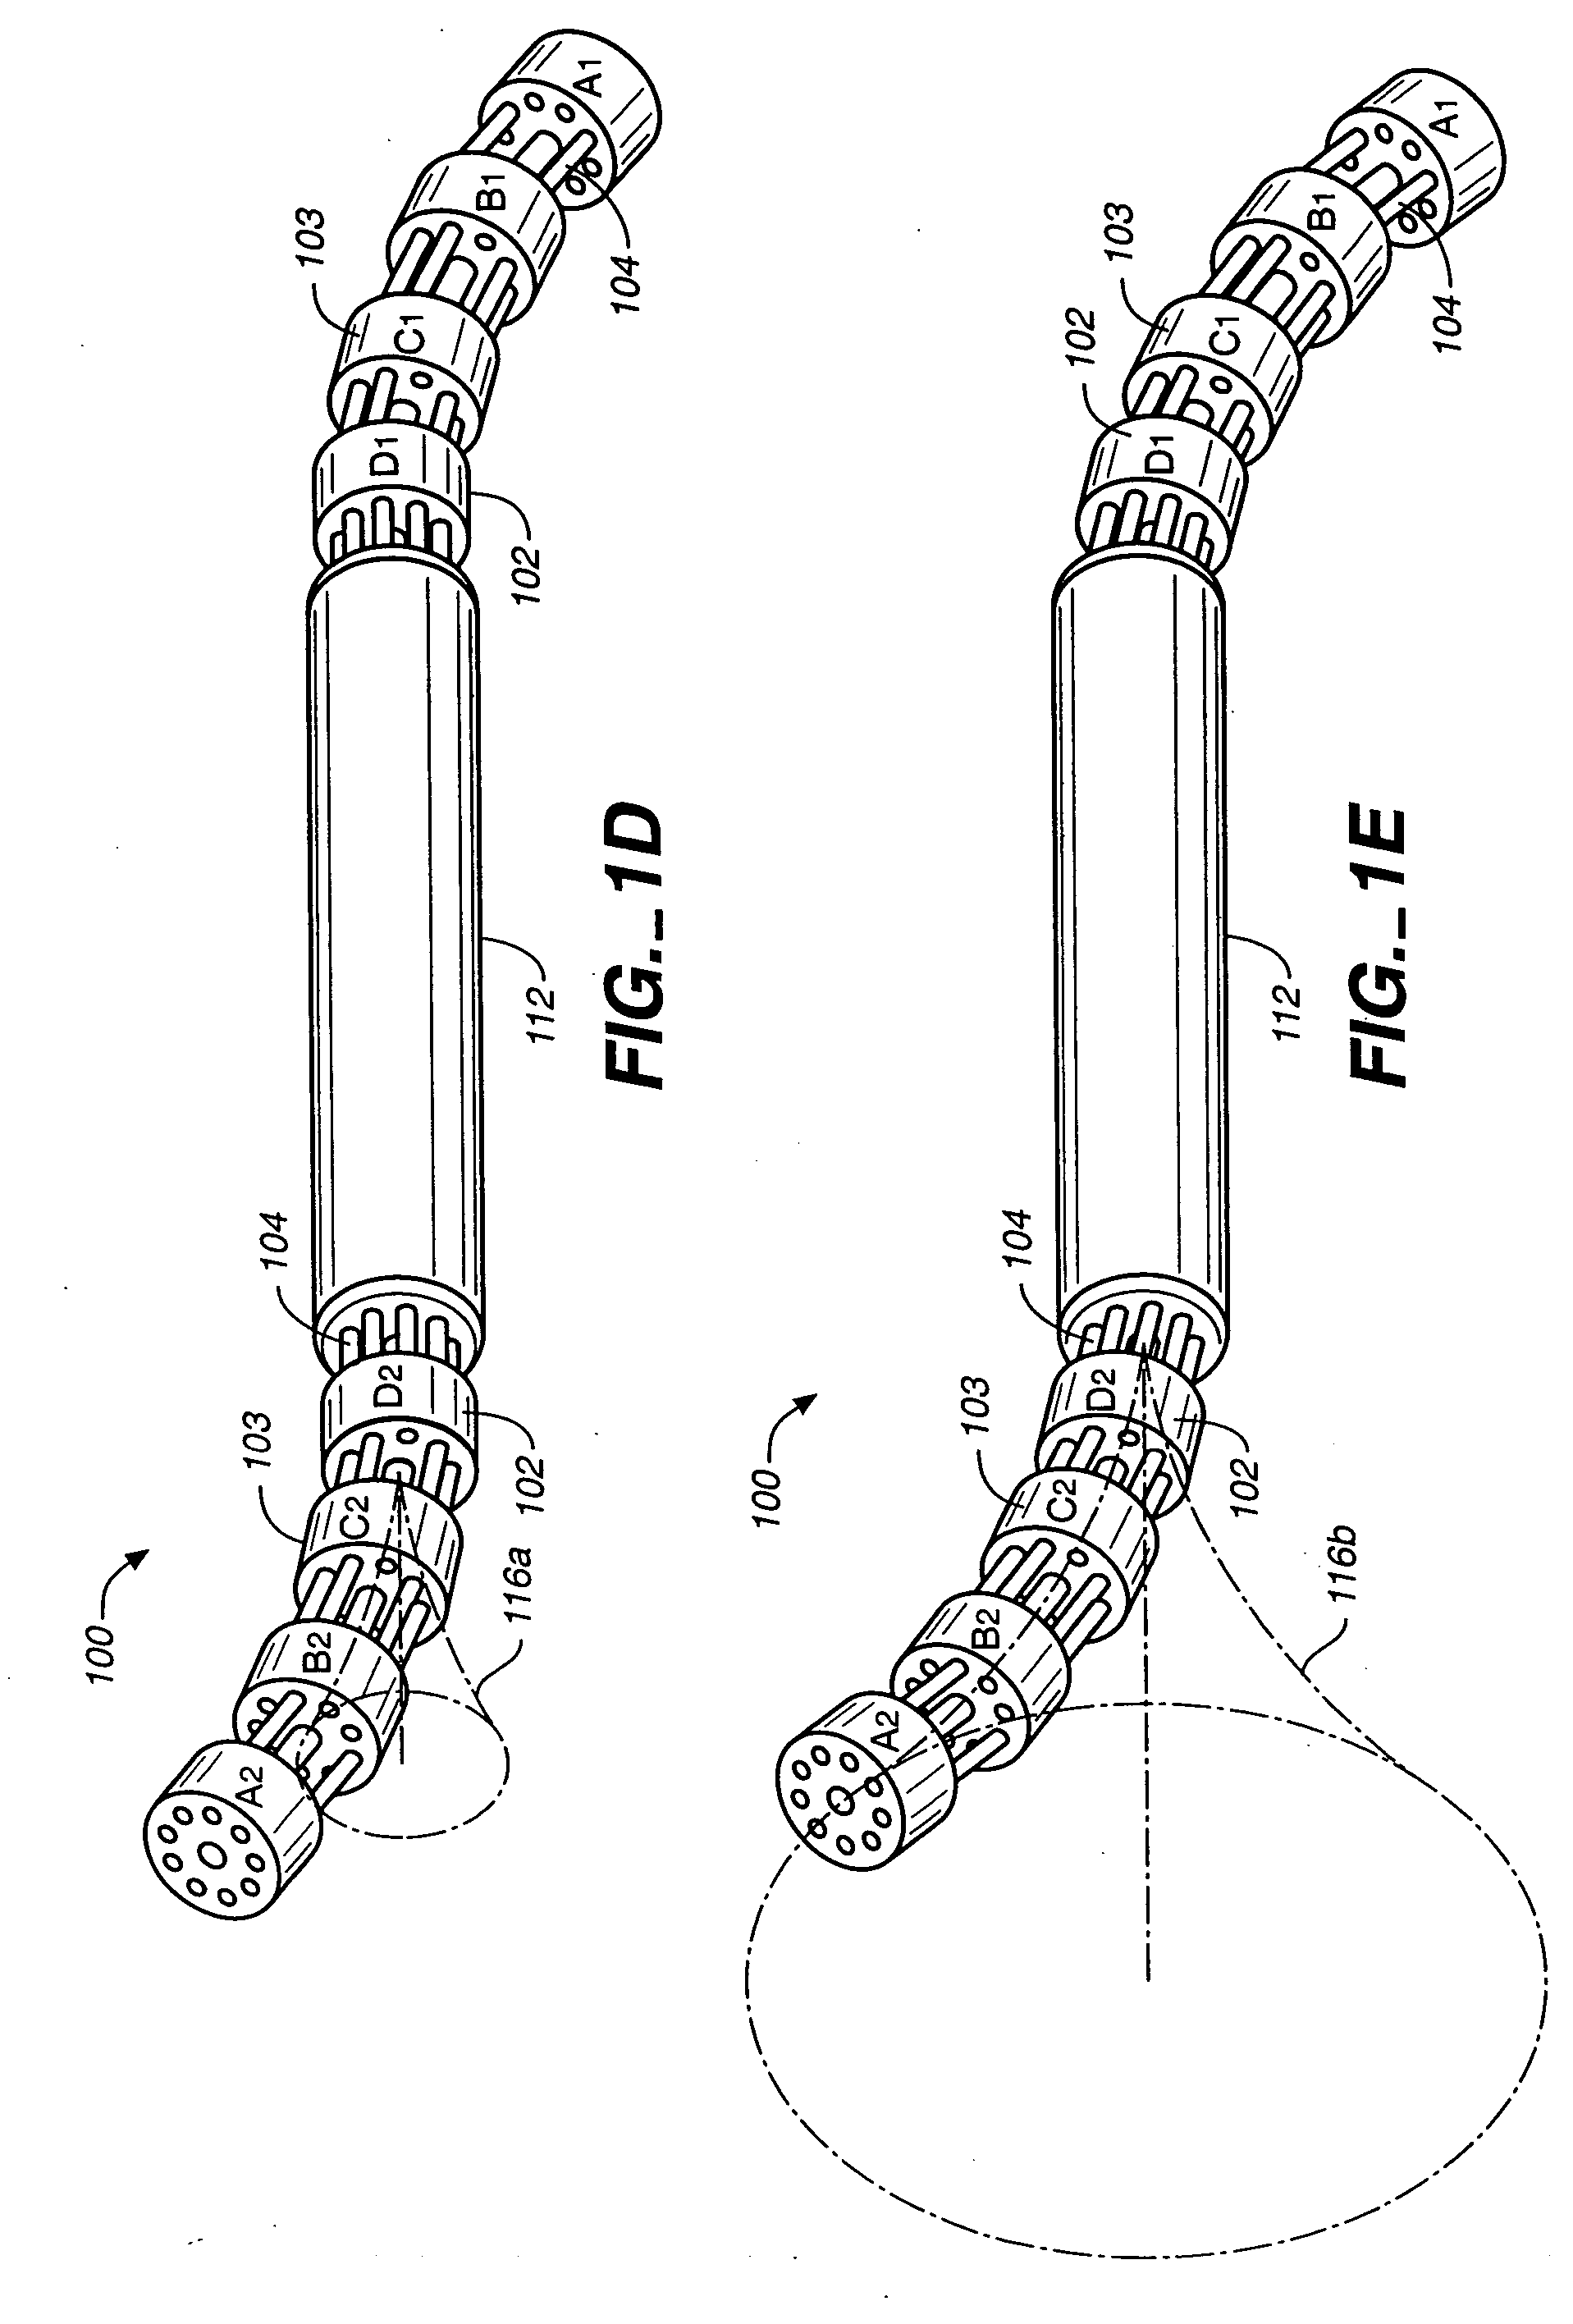 Articulating mechanism for remote manipulation of a surgical or diagnostic tool